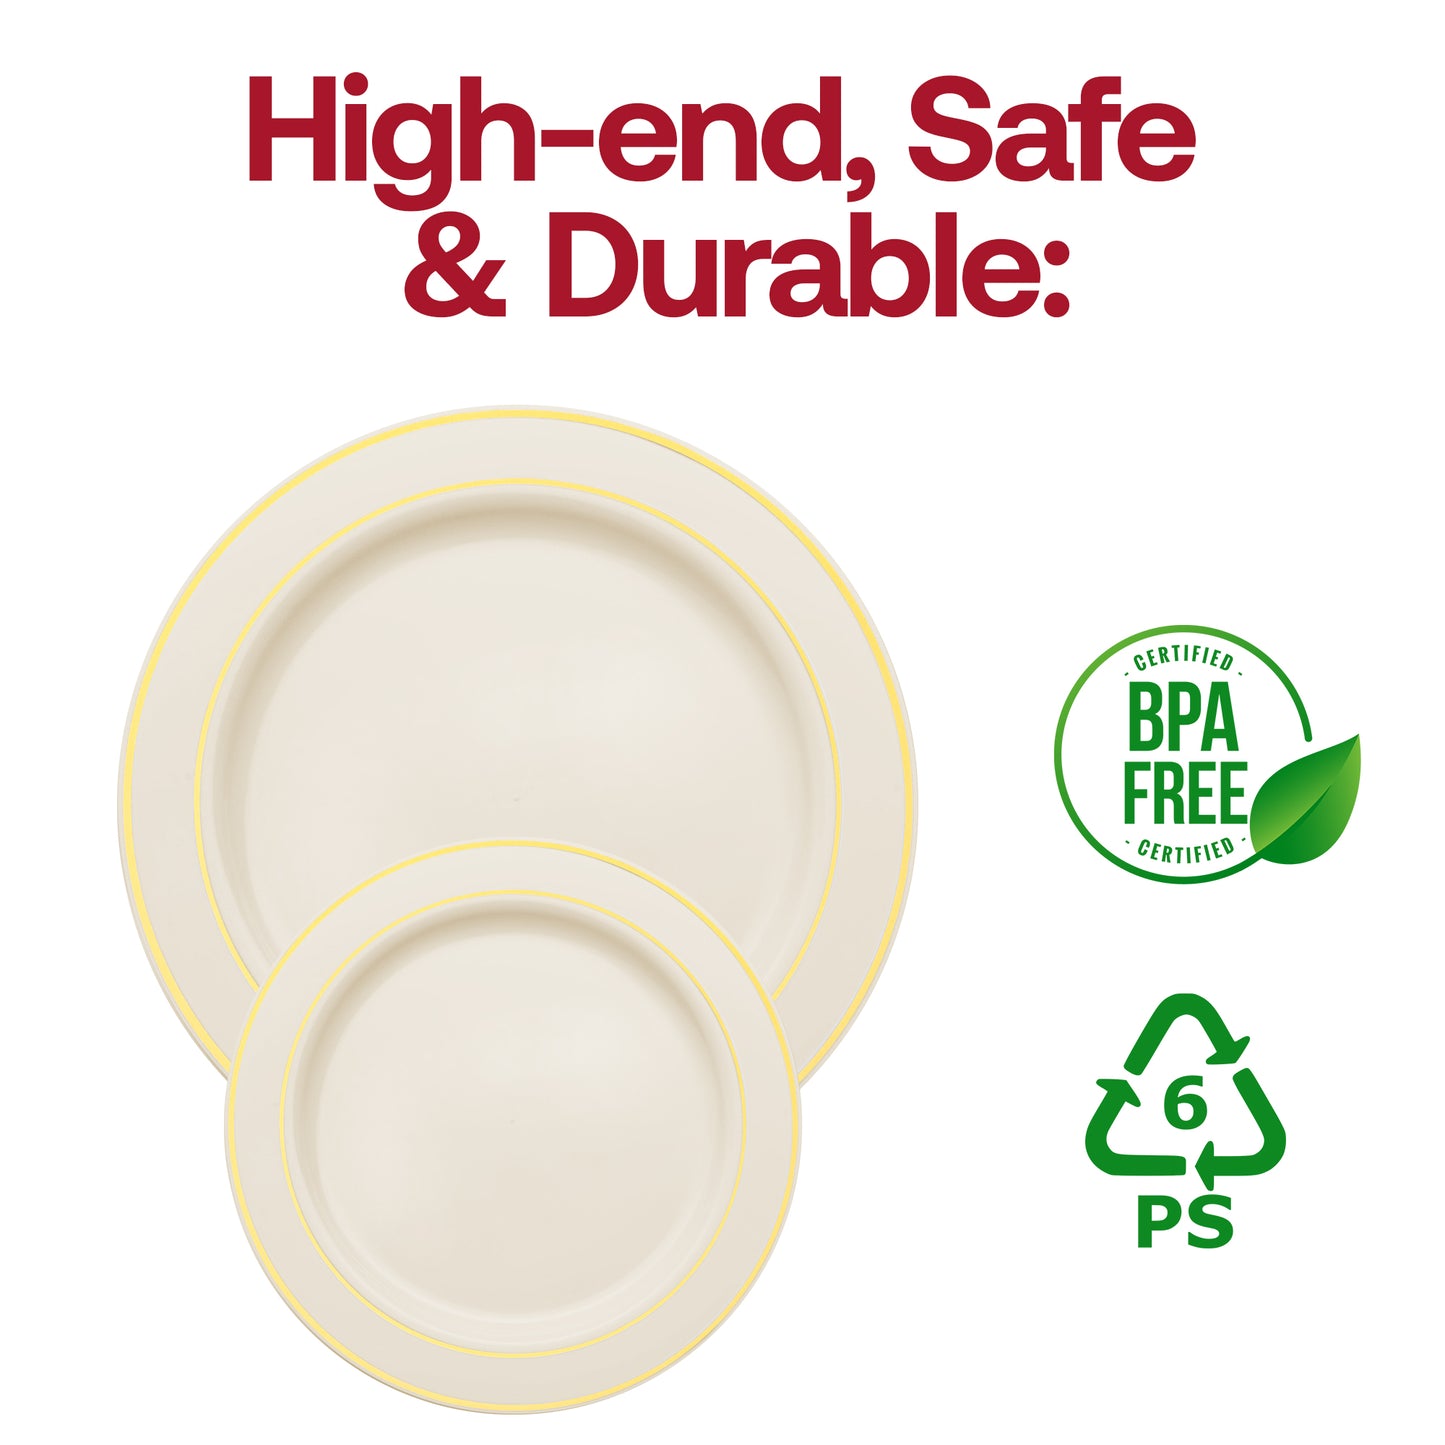 Ivory with Gold Edge Rim Plastic Appetizer/Salad Plates (7.5") BPA | The Kaya Collection